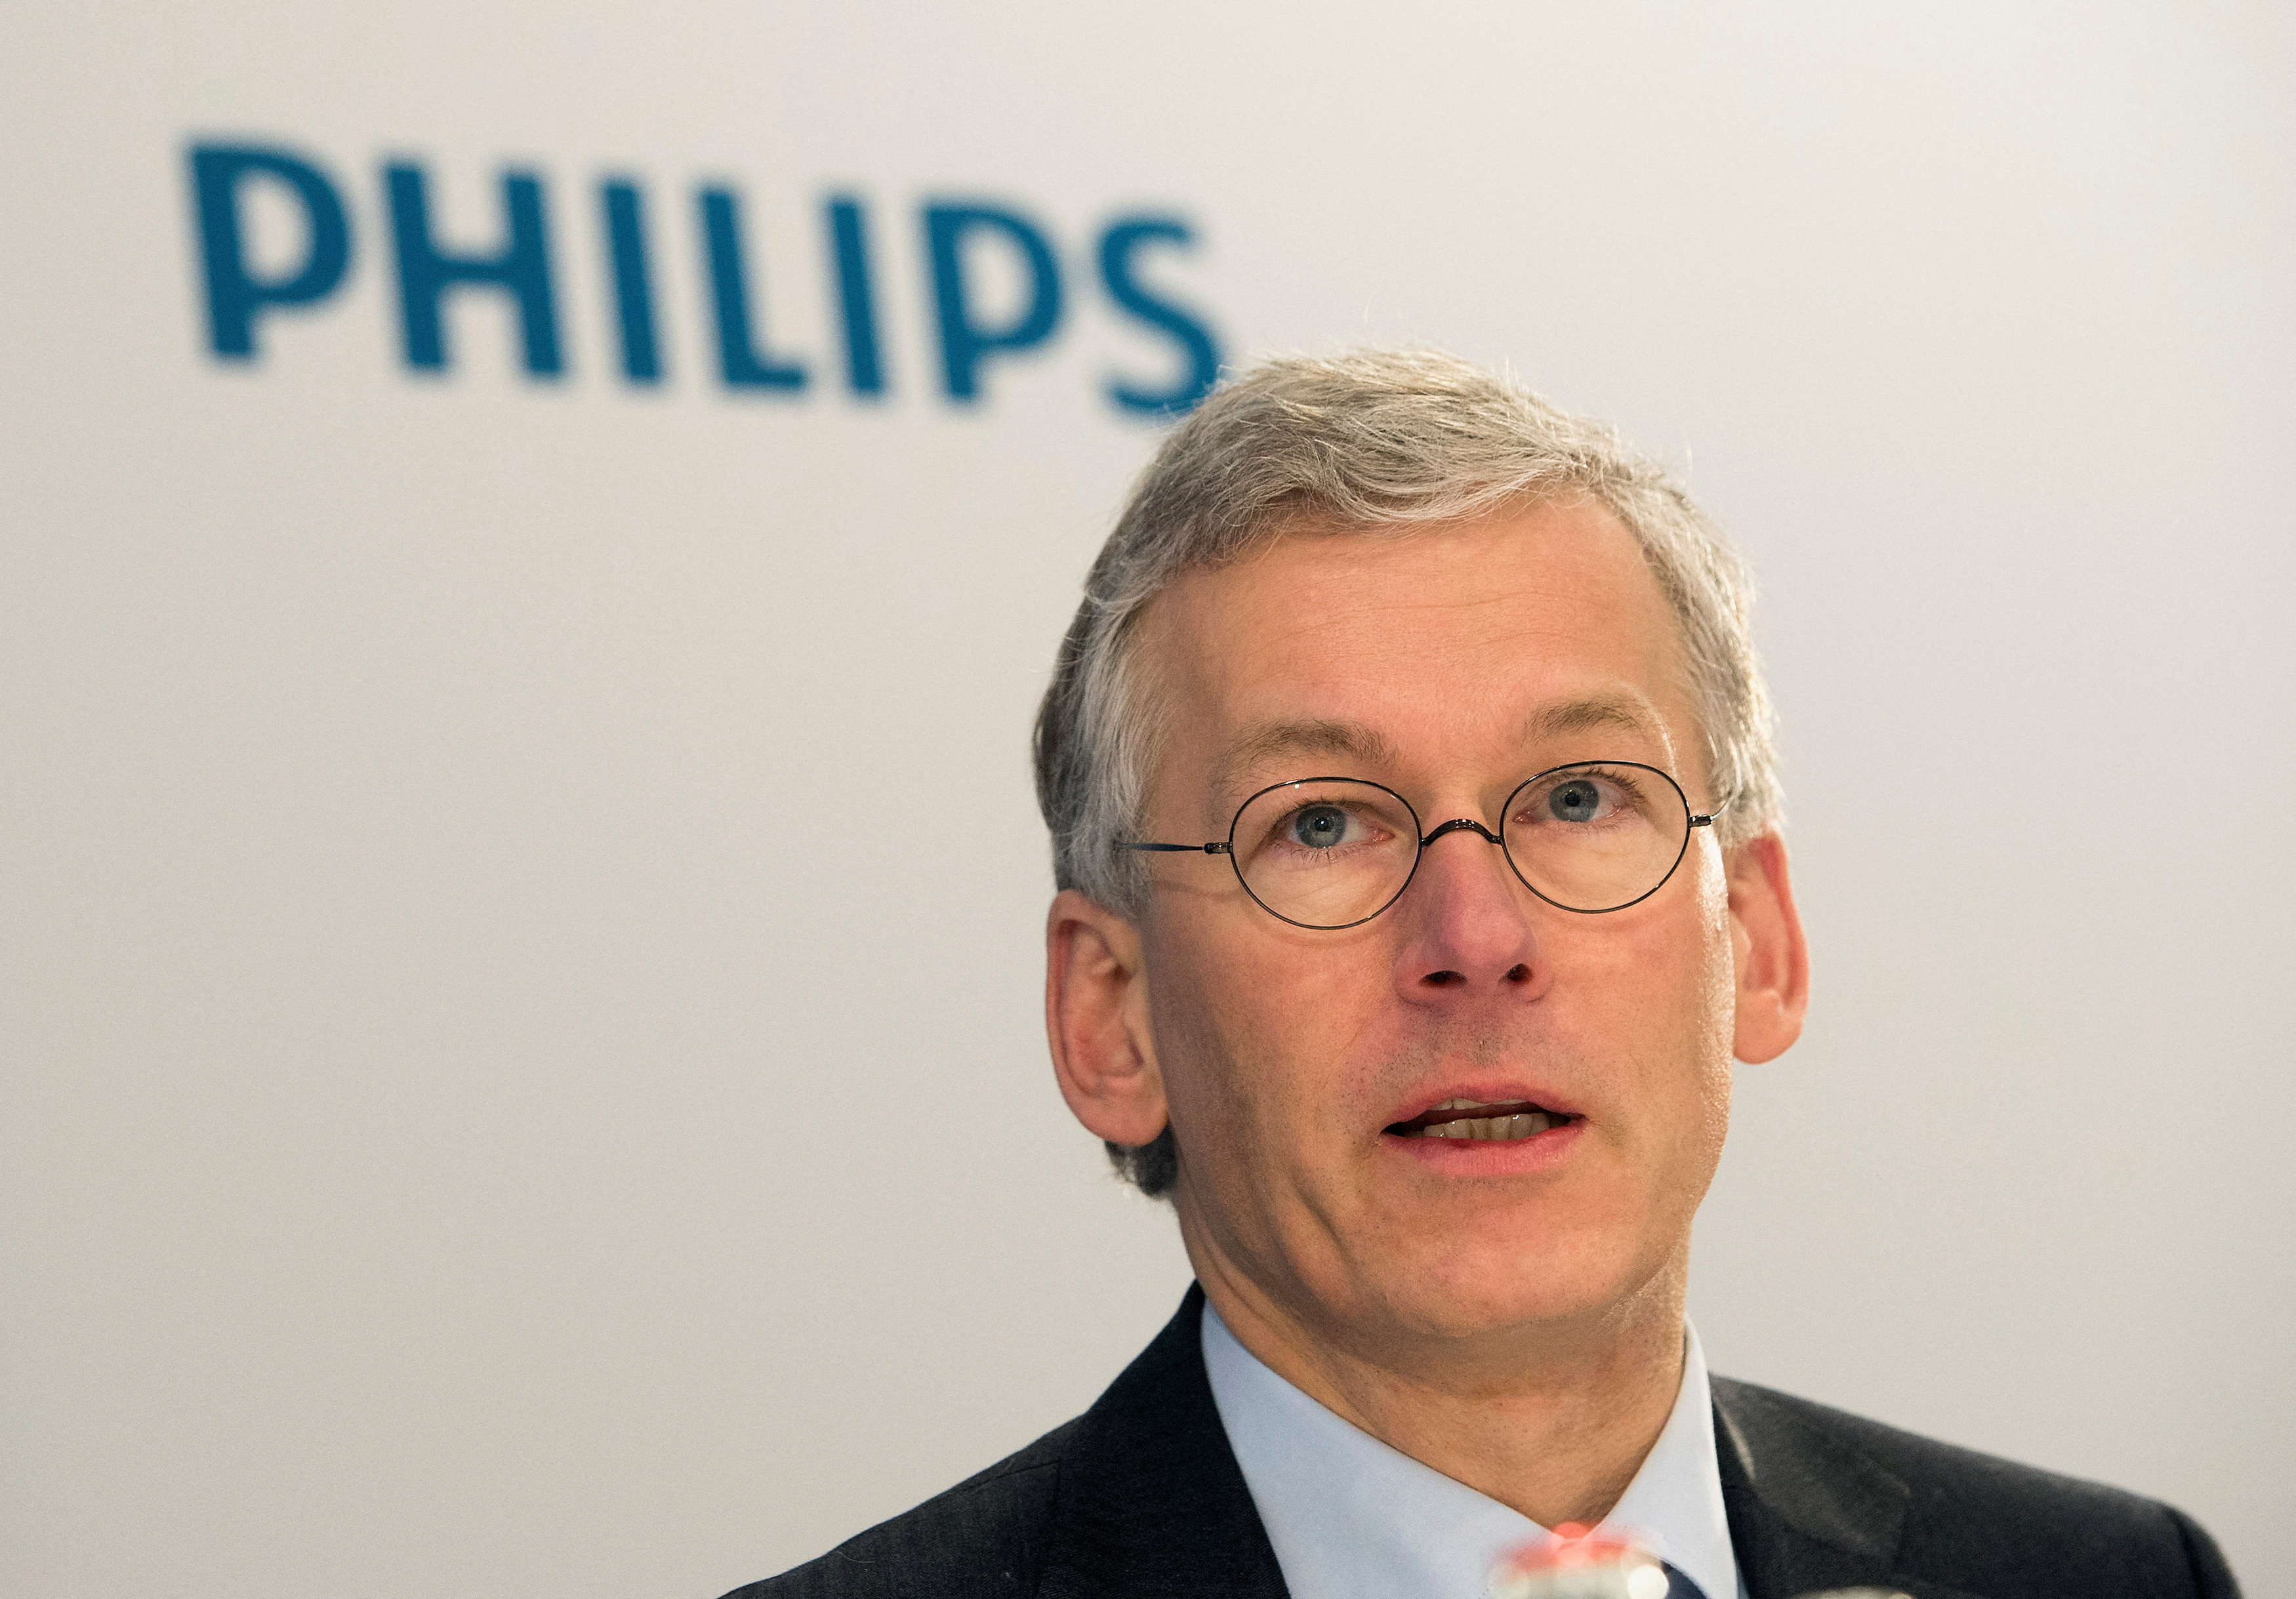 Van Houten, CEO of Philips, speaks during  the presentation of the 2013 full-year results in Amsterdam